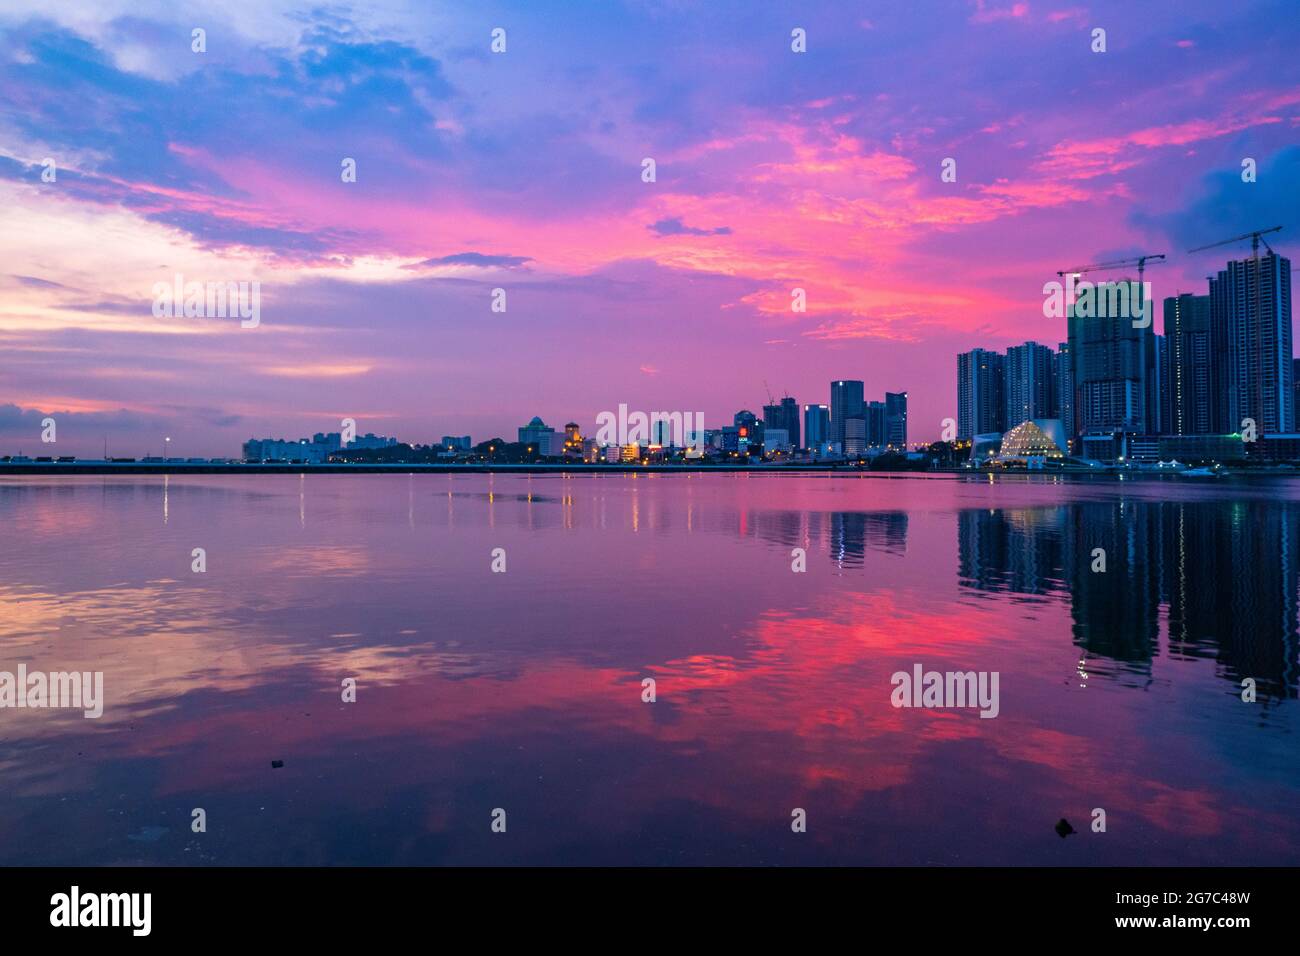 Dramatic sunset sky in central Singapore Stock Photo